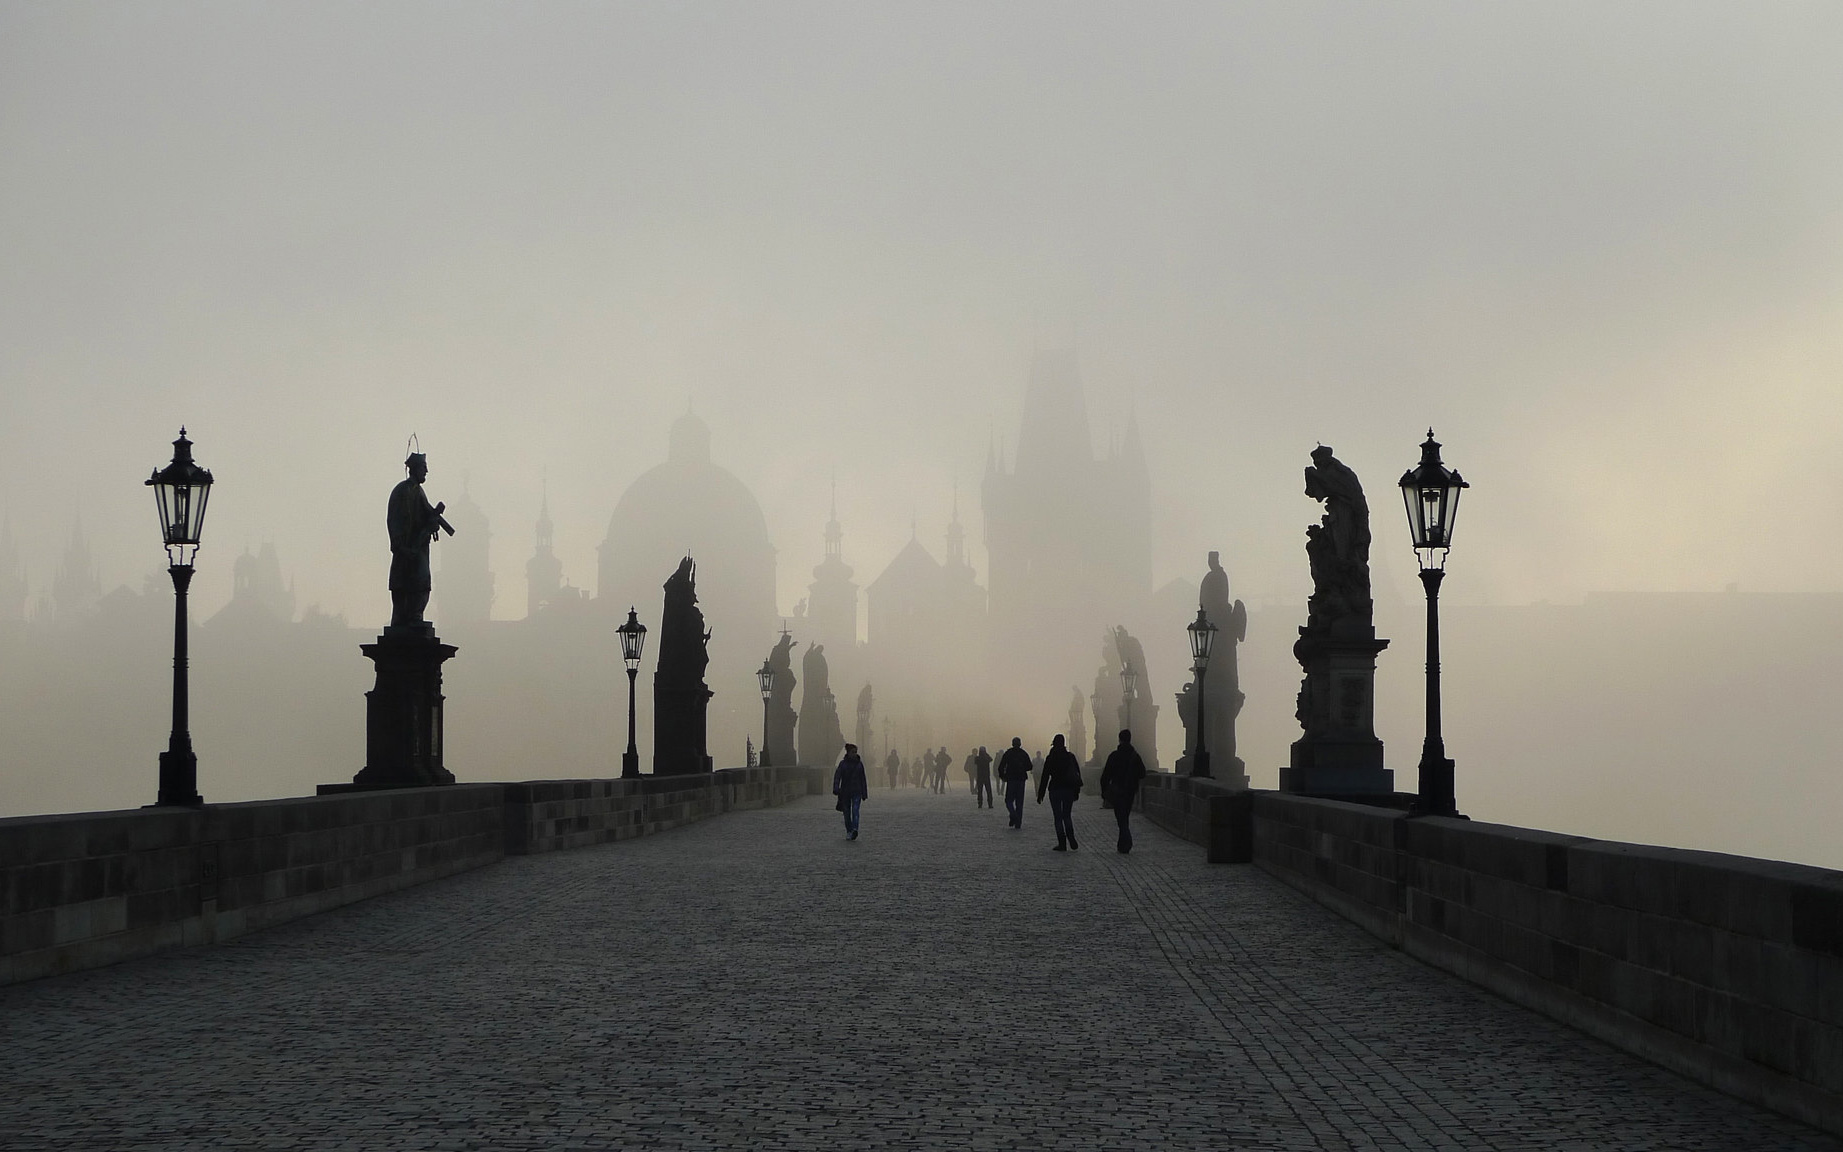 Image: Photo of a bridge on a foggy dawn. Silouhettes walk over the stone path under the water of statues. Titled, Prague: Charles Bridge in the Mist (Explored)